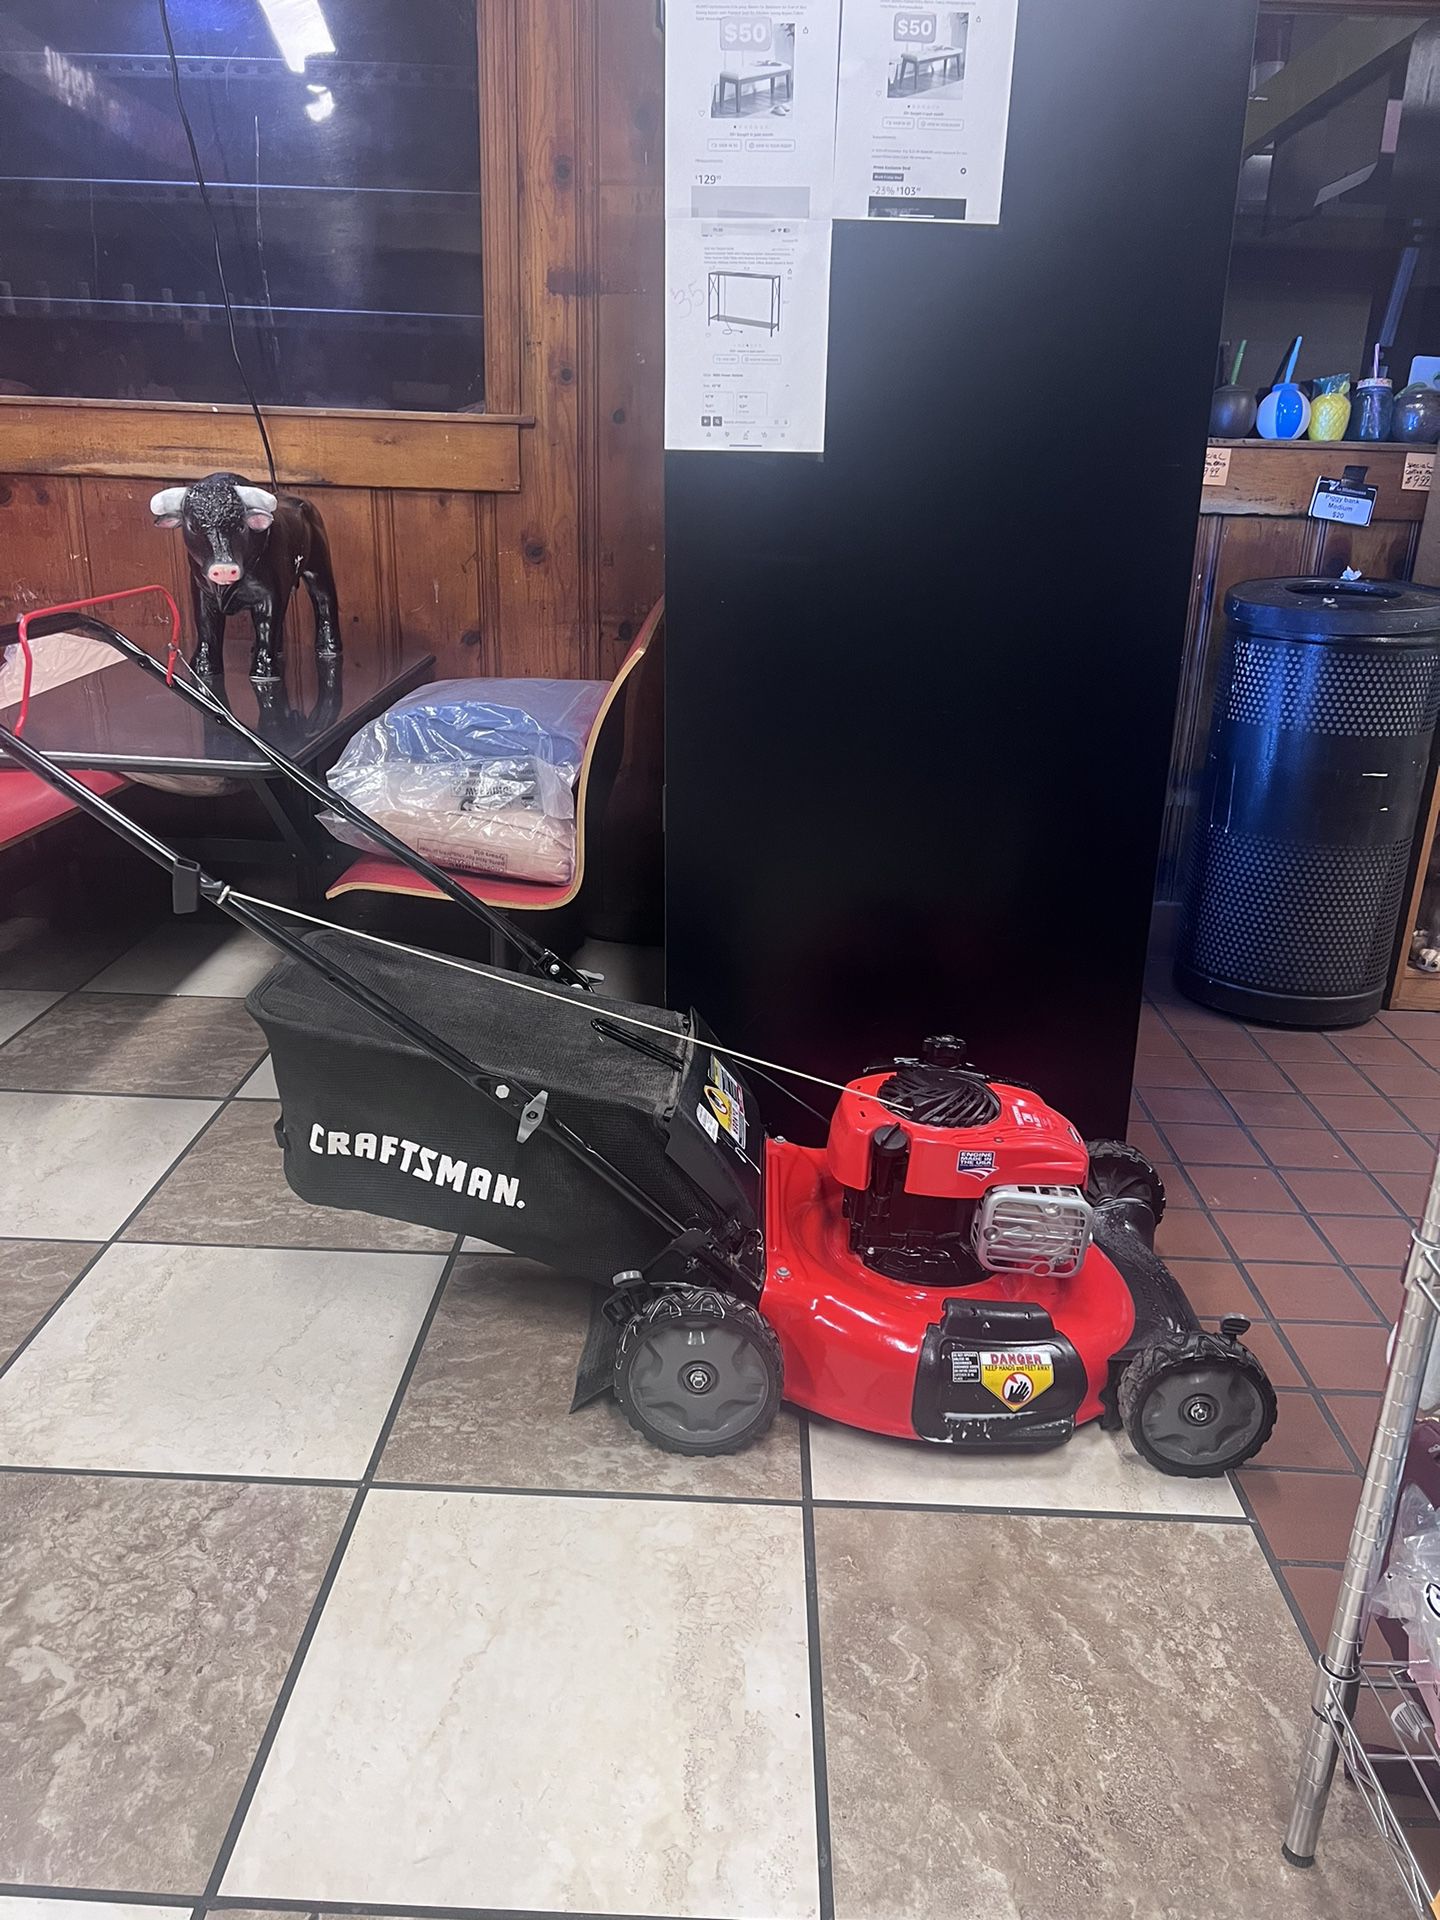 Craftsman Lawnmower M110 140-cc 21-in Gas Push Lawn Mower with Briggs and Stratton Engine